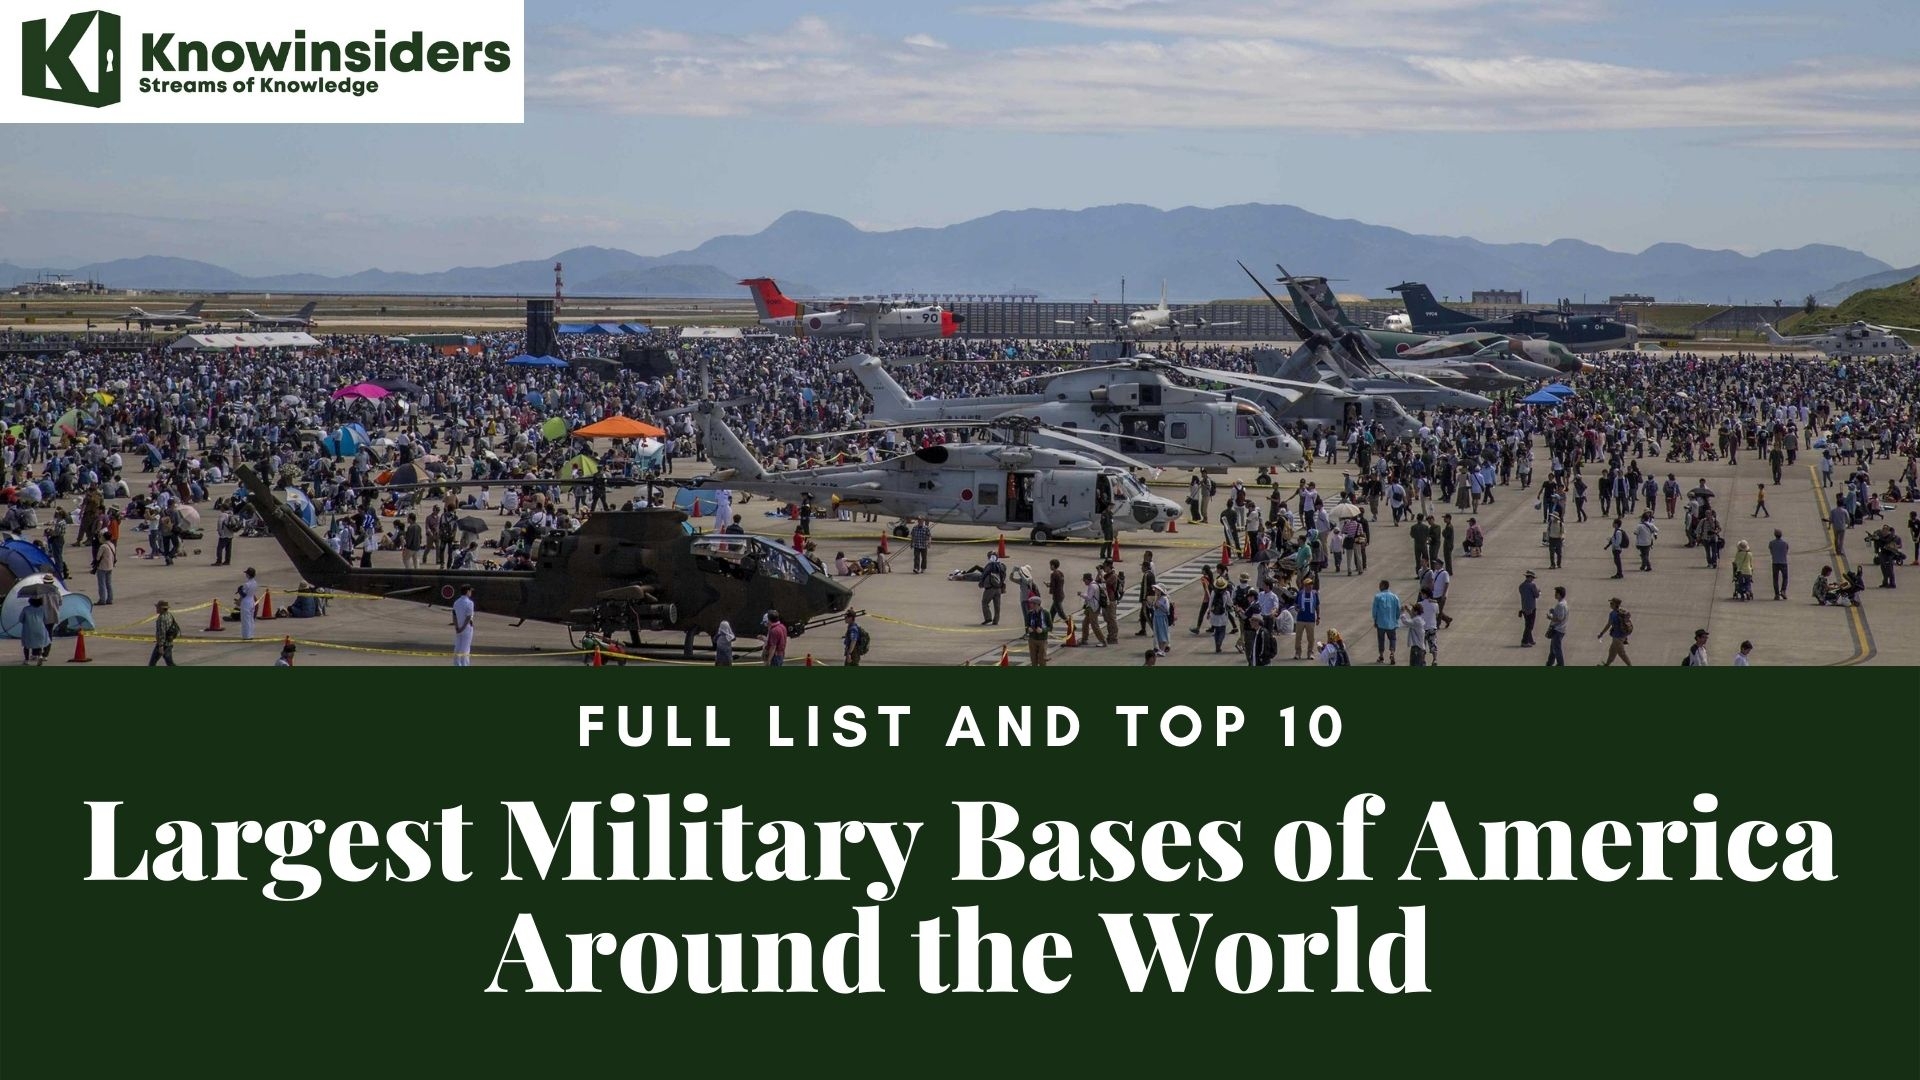 Full List and Top 10 Largest Military Bases of America Around the World